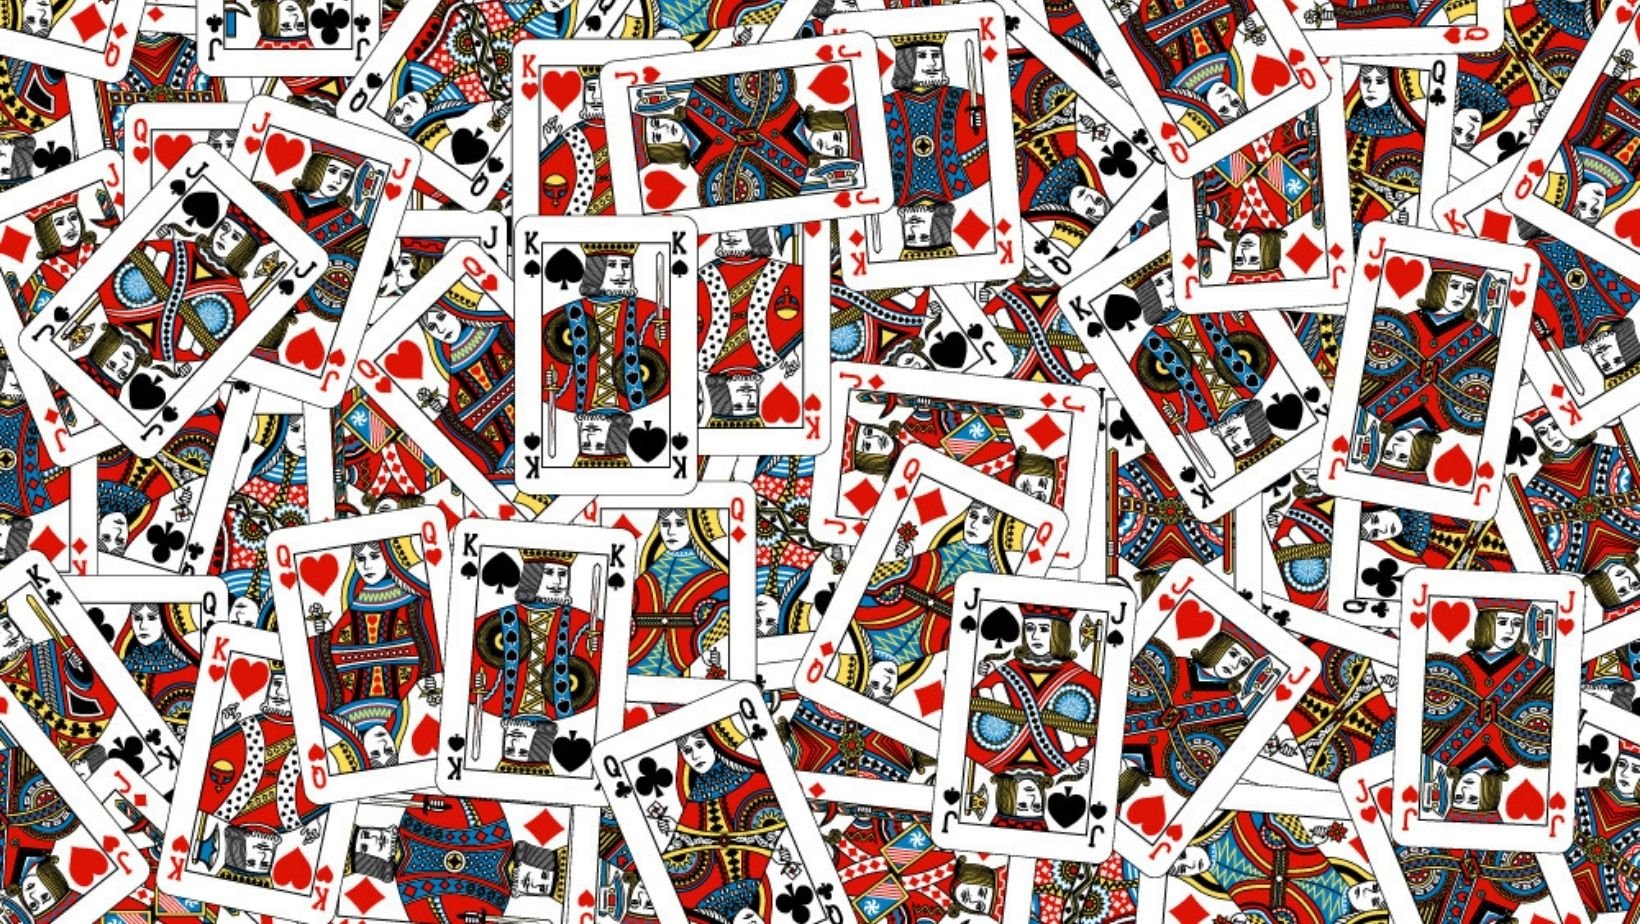 small joys thumbnail 1 8.jpg?resize=412,275 - How Fast Can You Find The ONE-EYED JACK In This Deck?